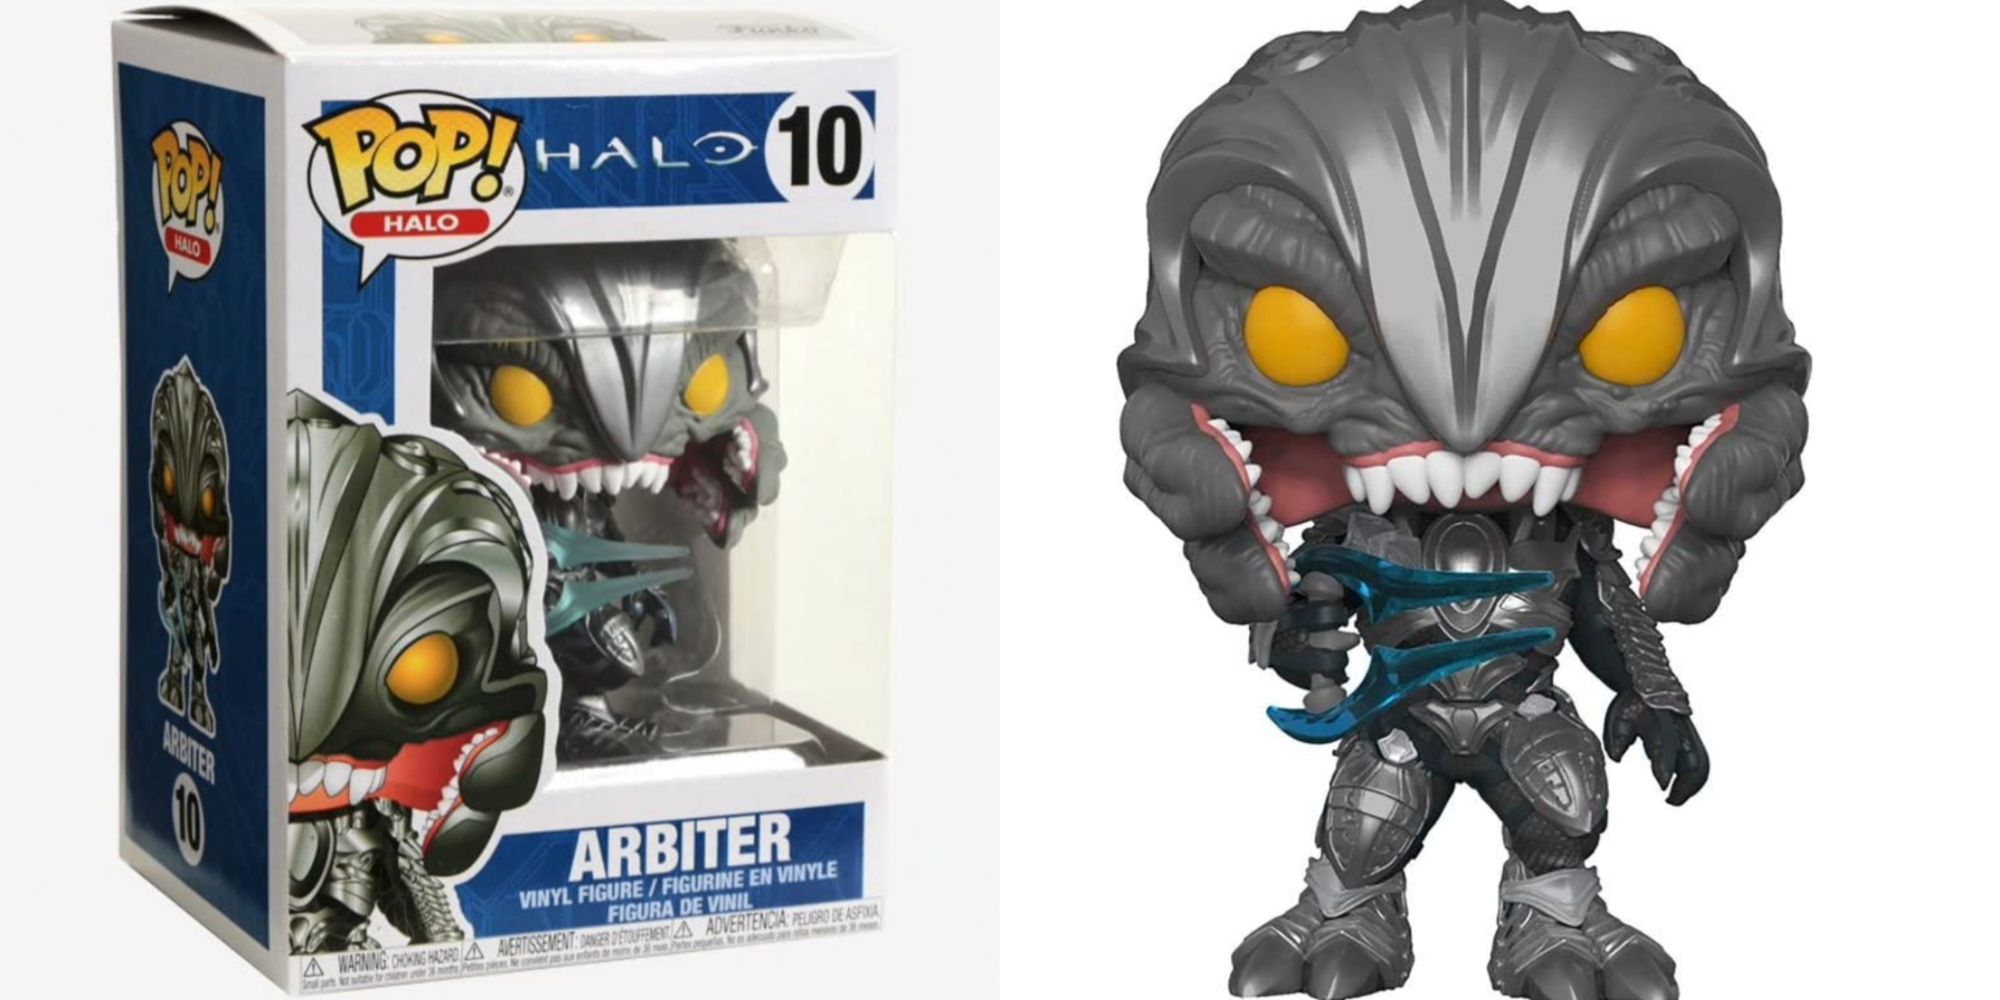 Halo Arbiter Funko Pop collectible in and out of box